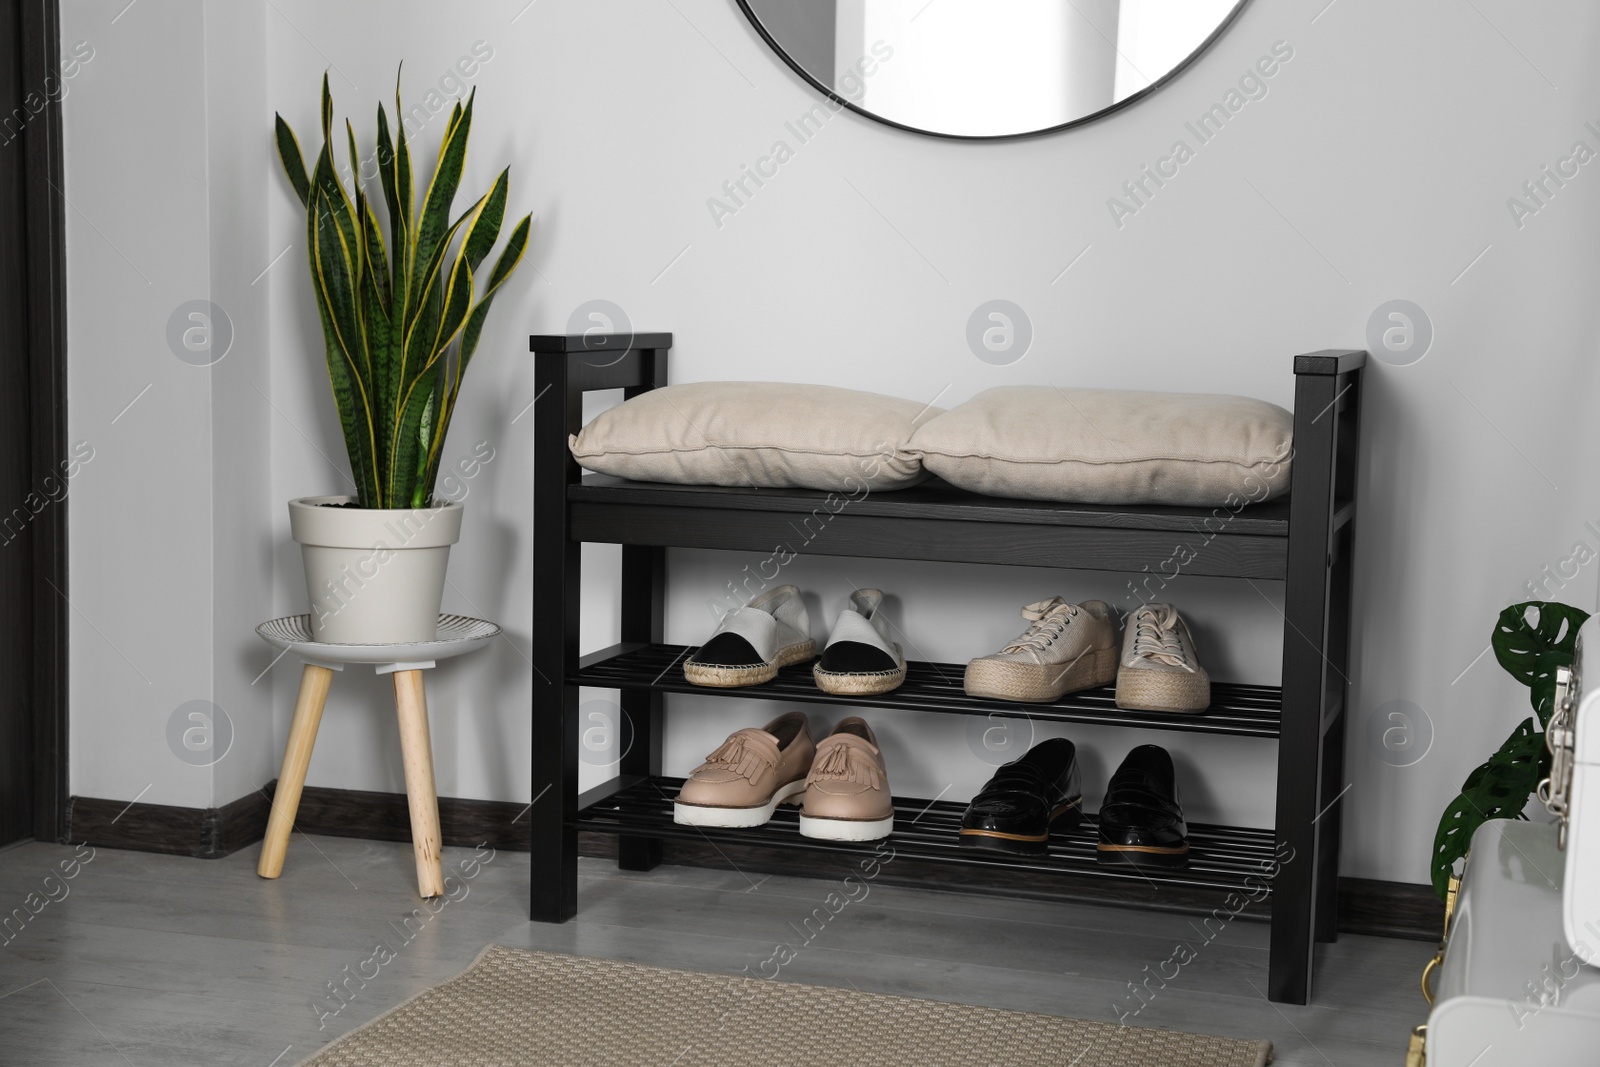 Photo of Hallway interior with shoe storage bench and houseplant